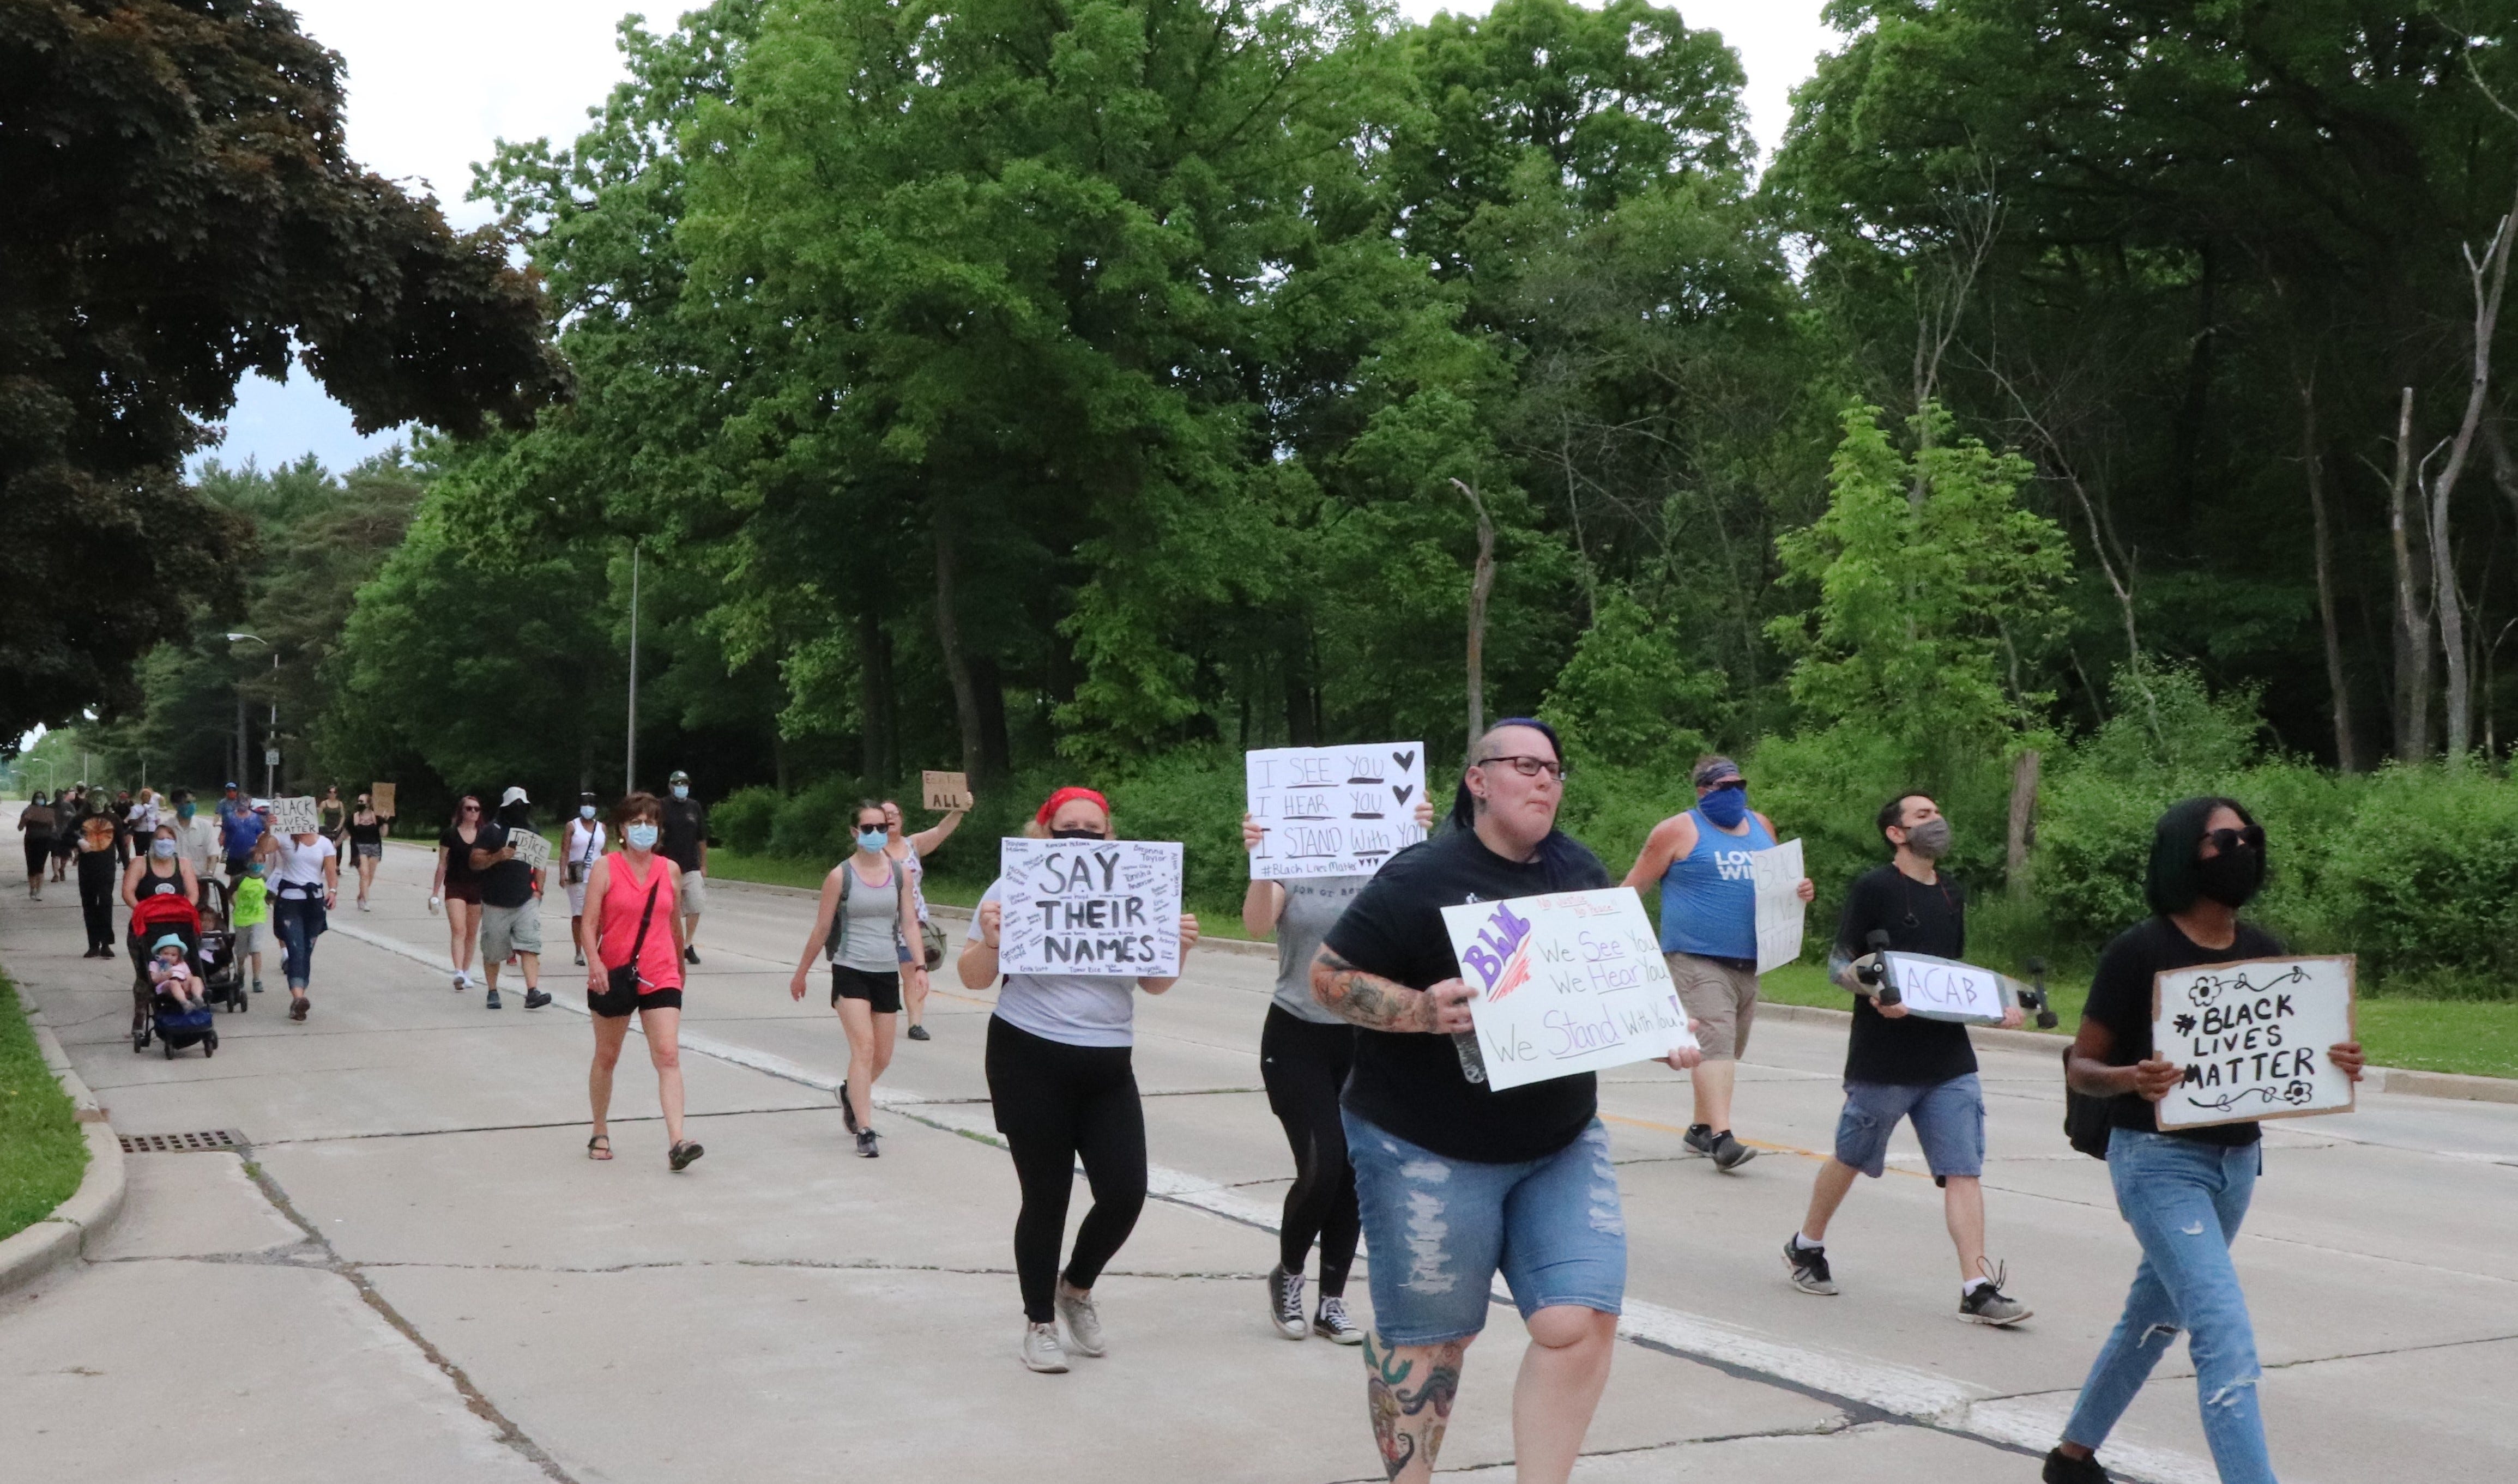 About 50 people march east on Lincoln Avenue in West Allis during a protest on Friday, June 5.